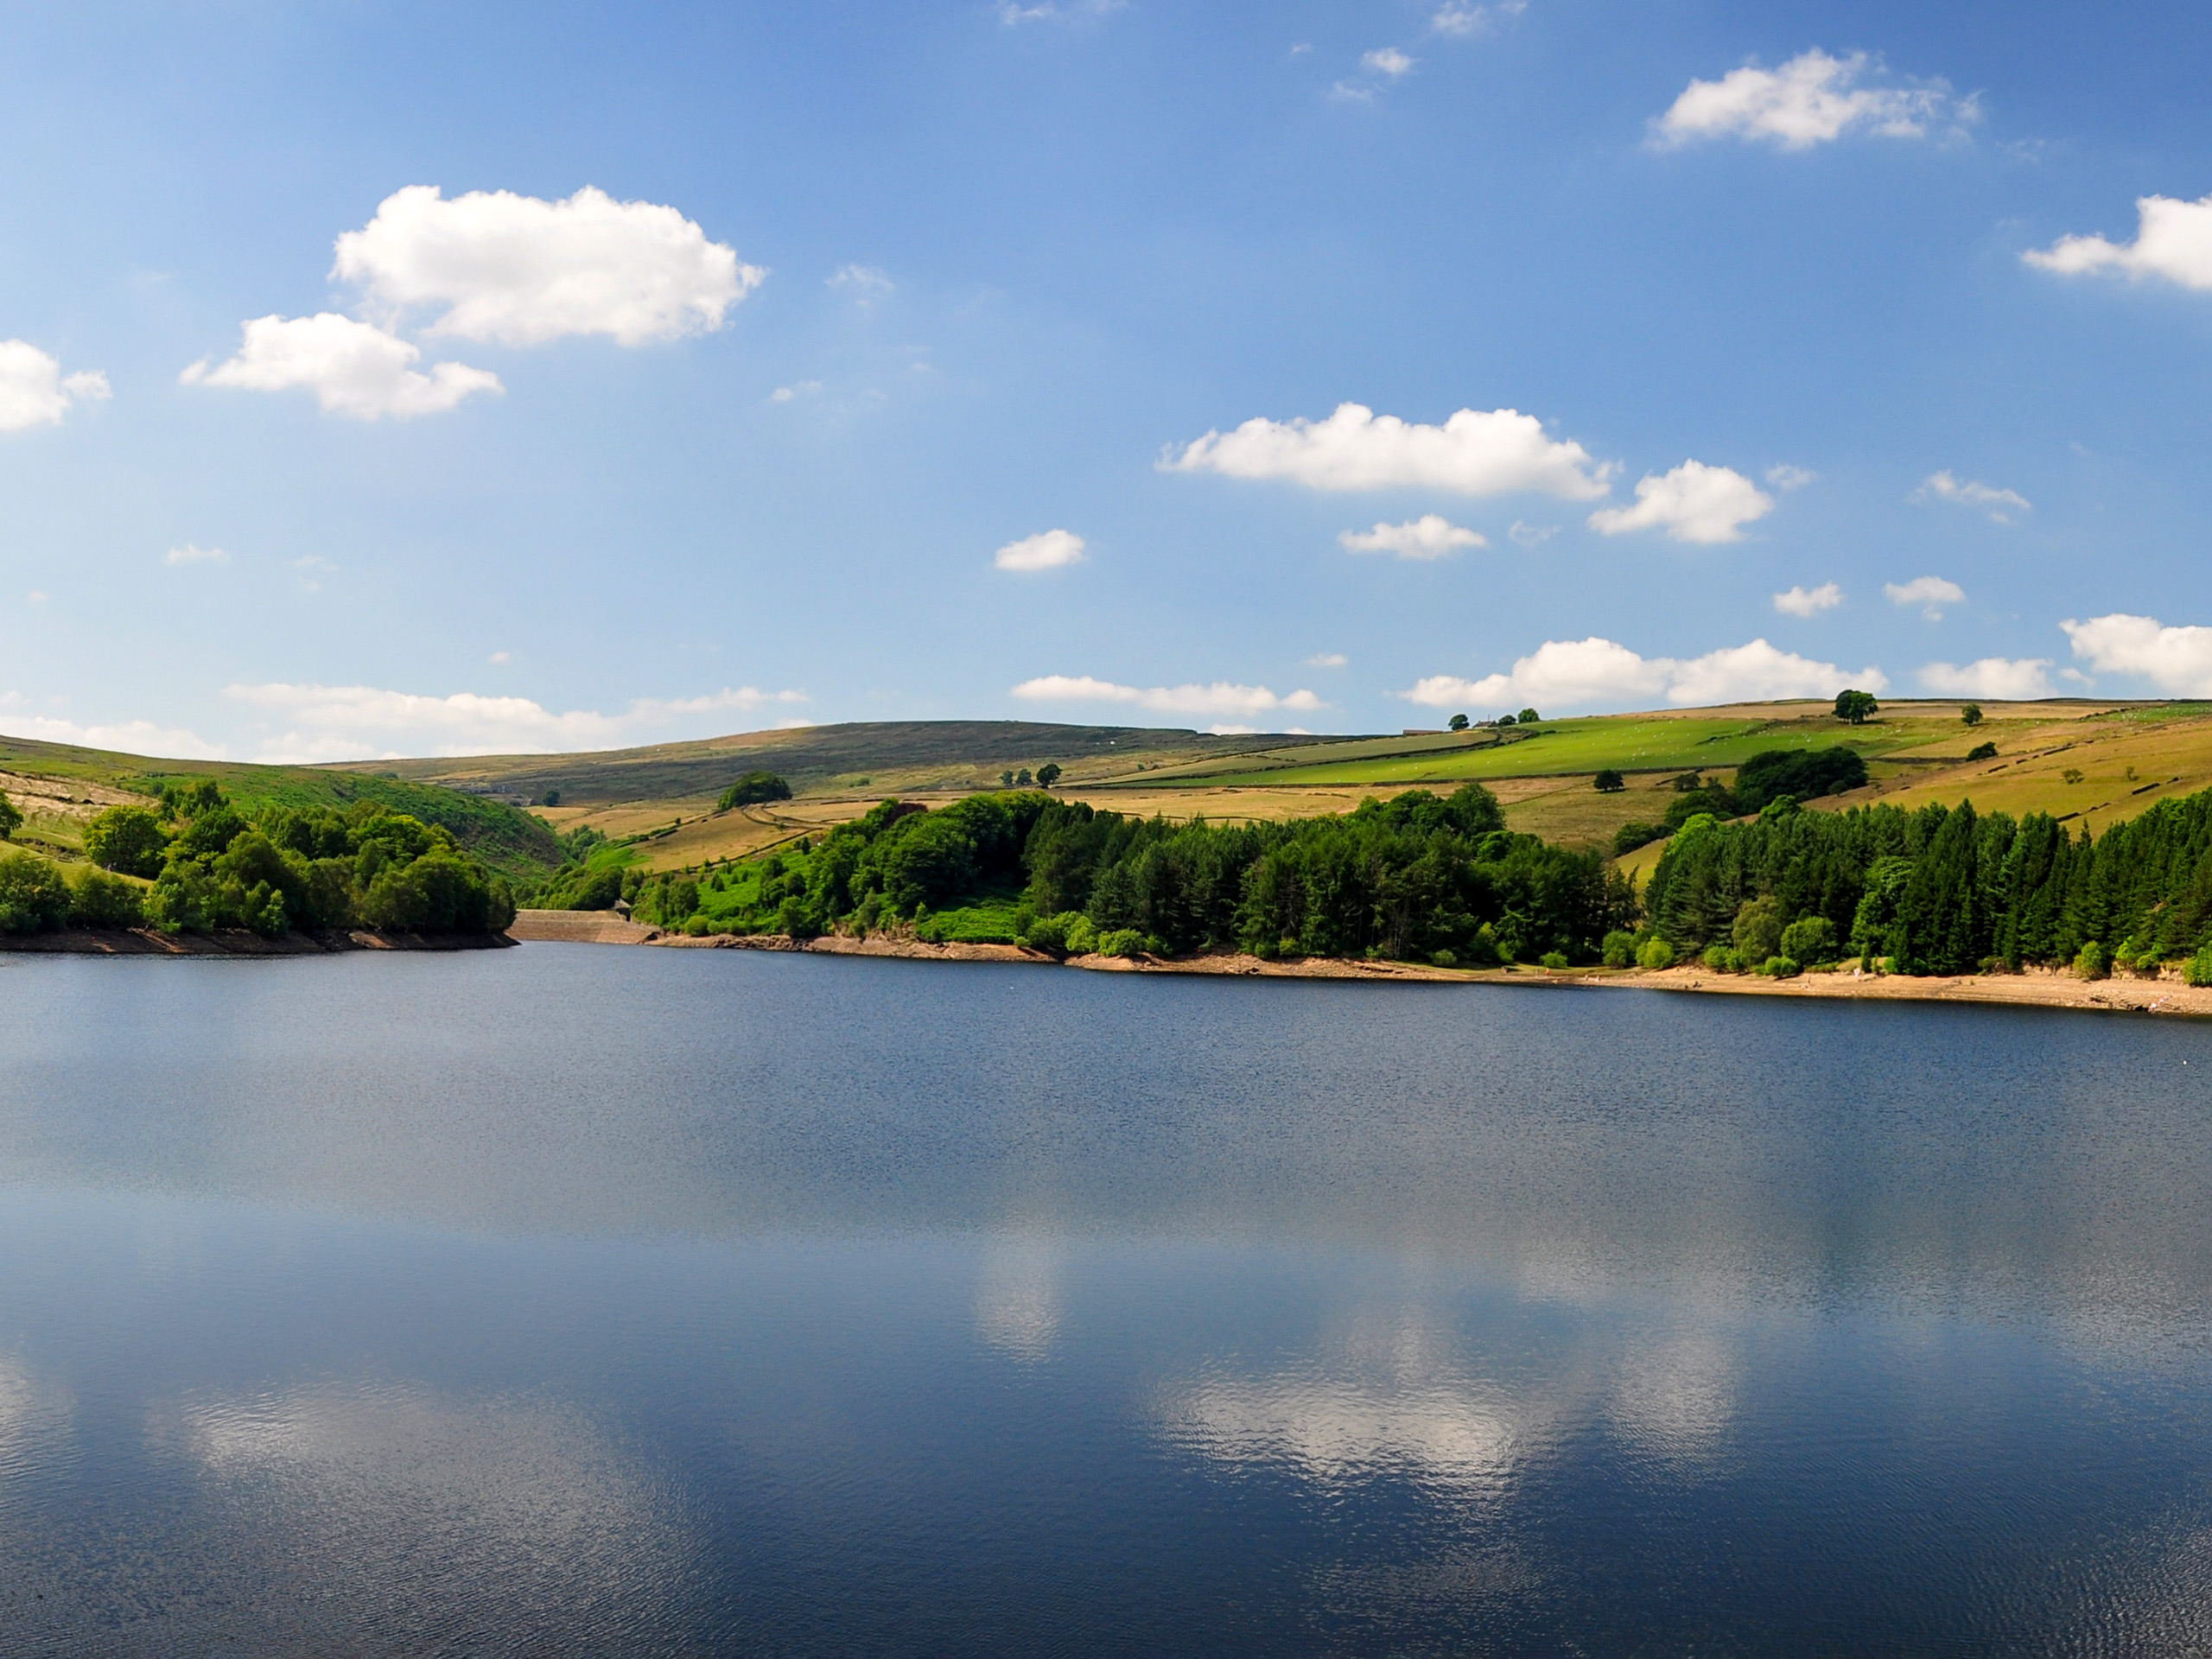 Ripples on the surface of the Digley Reservoir